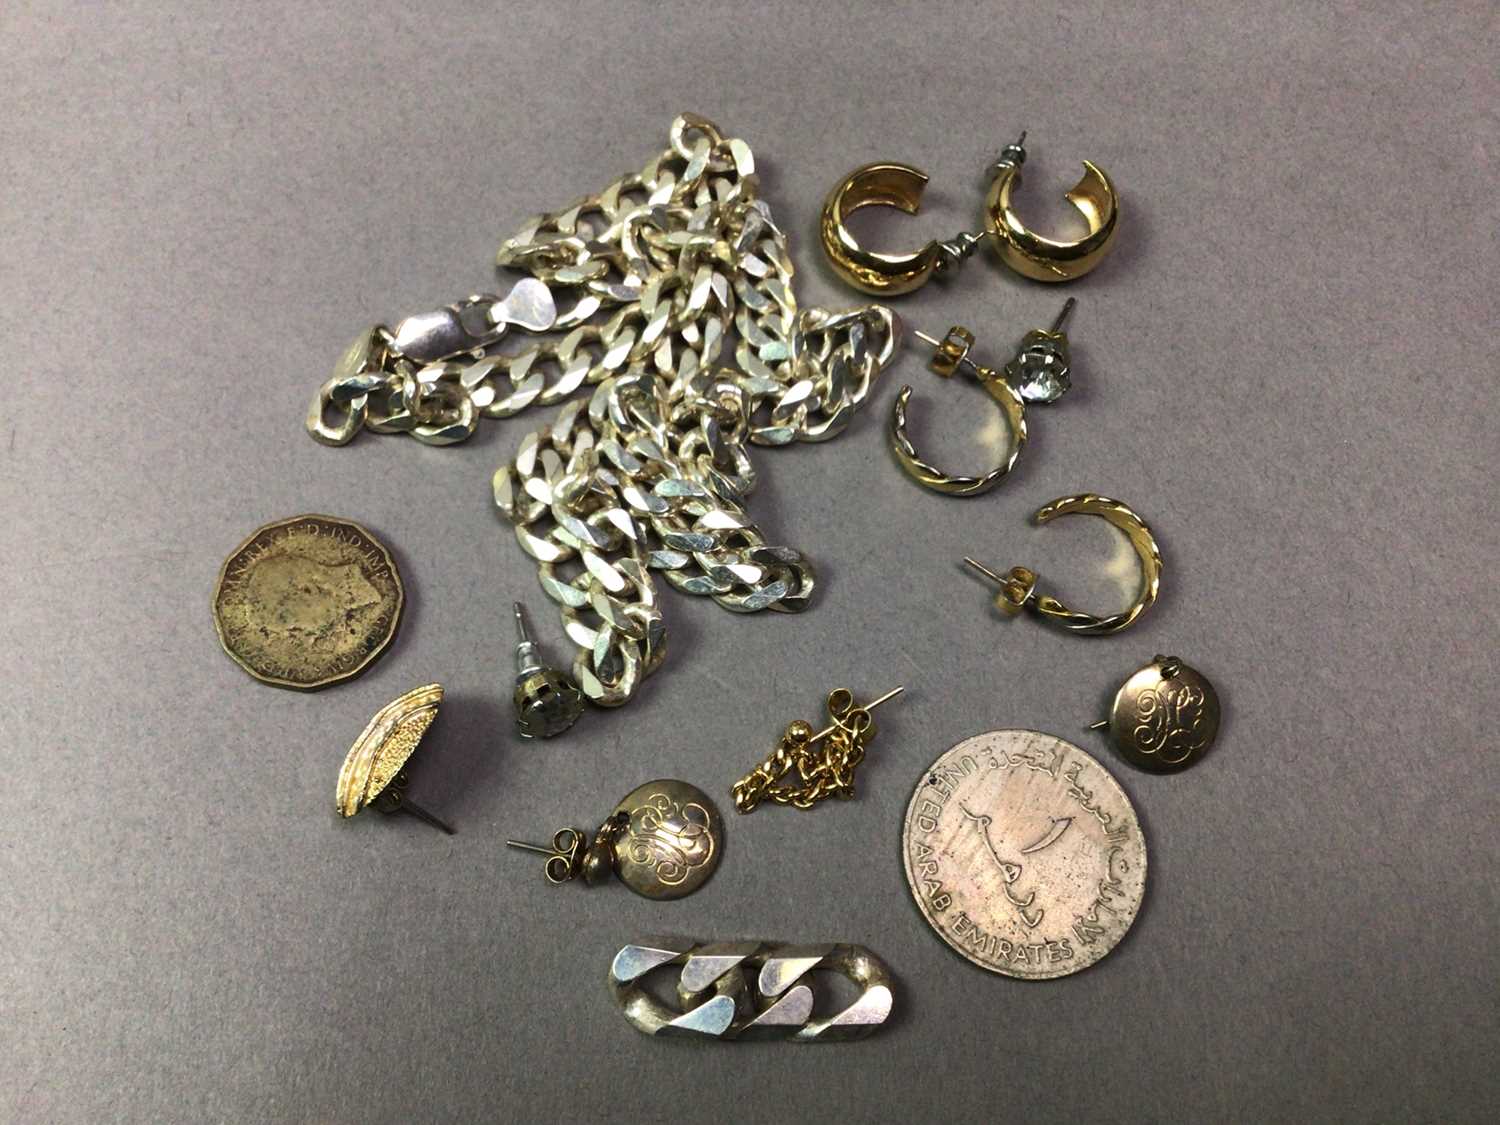 SILVER NECKLACE AND OTHER ITEMS - Image 2 of 3